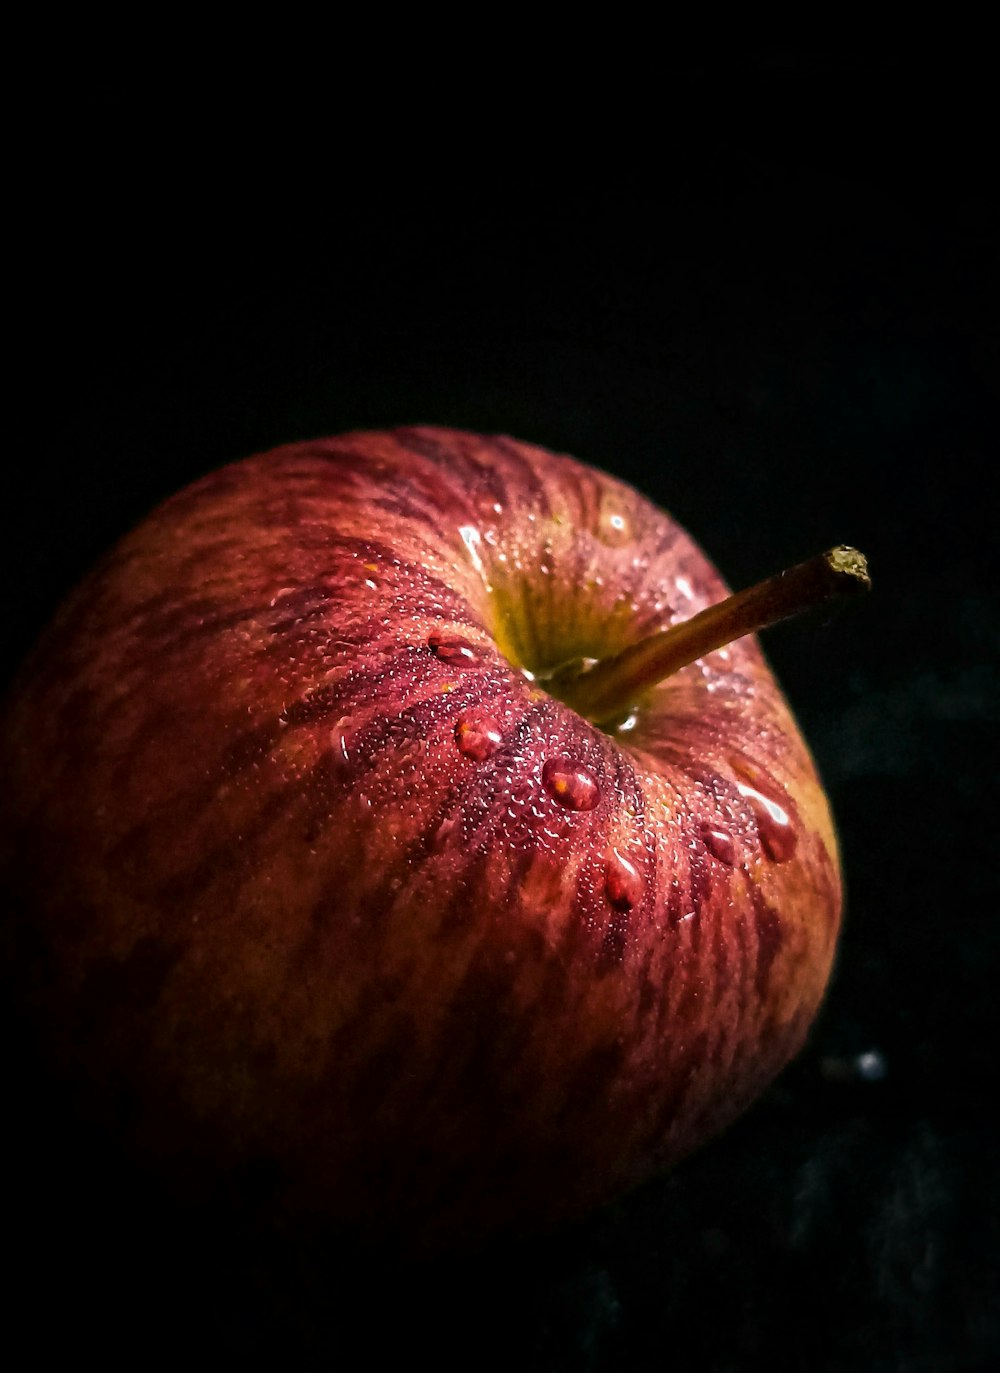 red apple fruit with black background